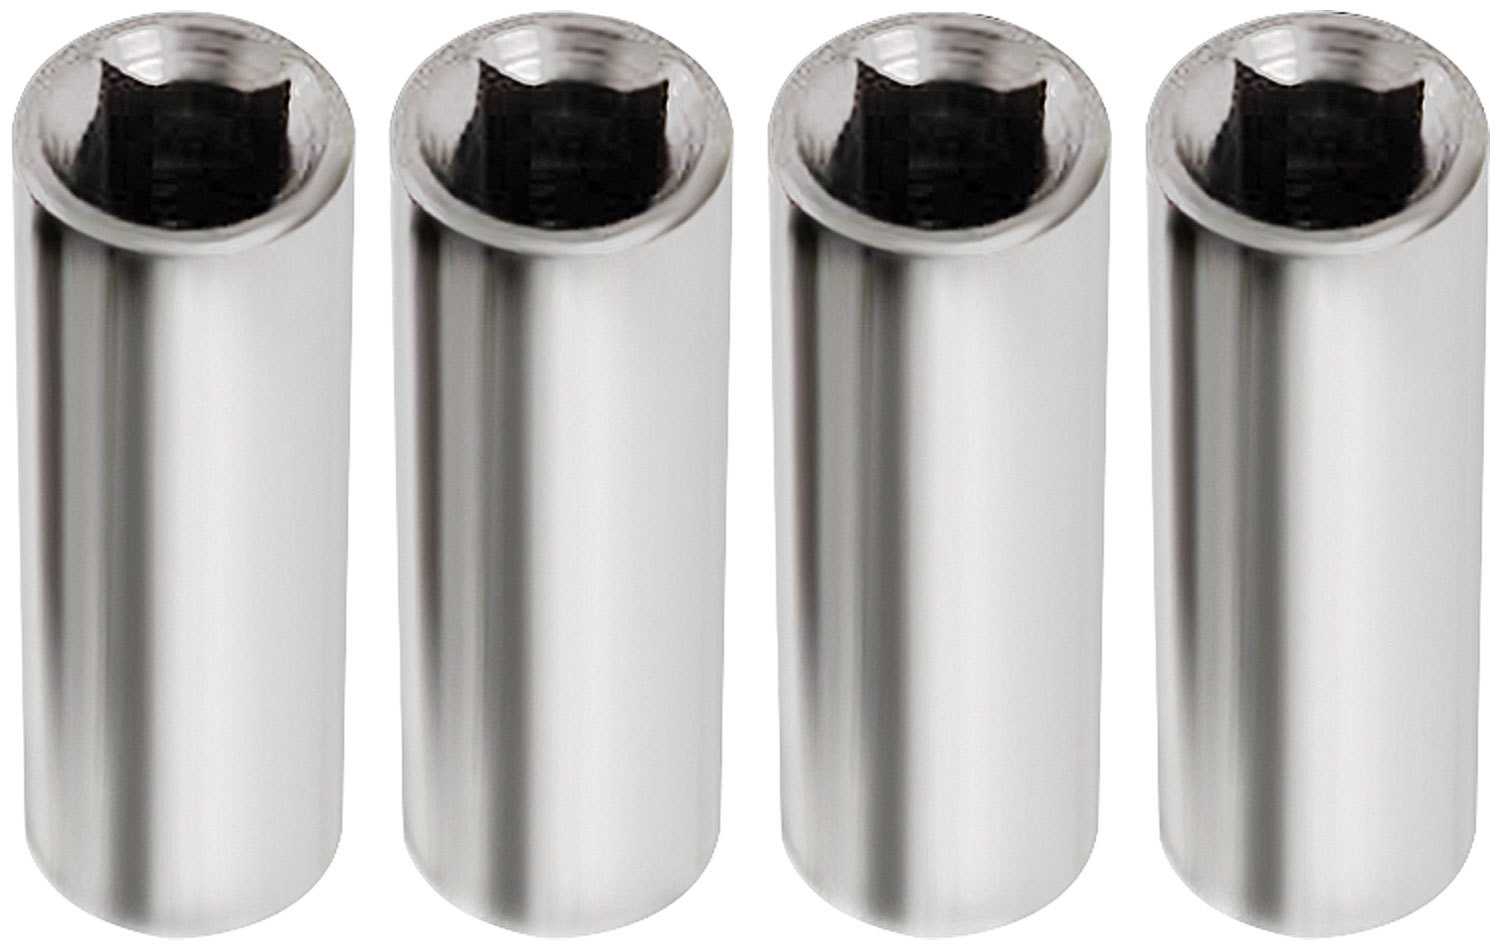 Allstar Performance 26320 - Valve Cover Hold Down Nuts 1/4in-20 Thread 4pk